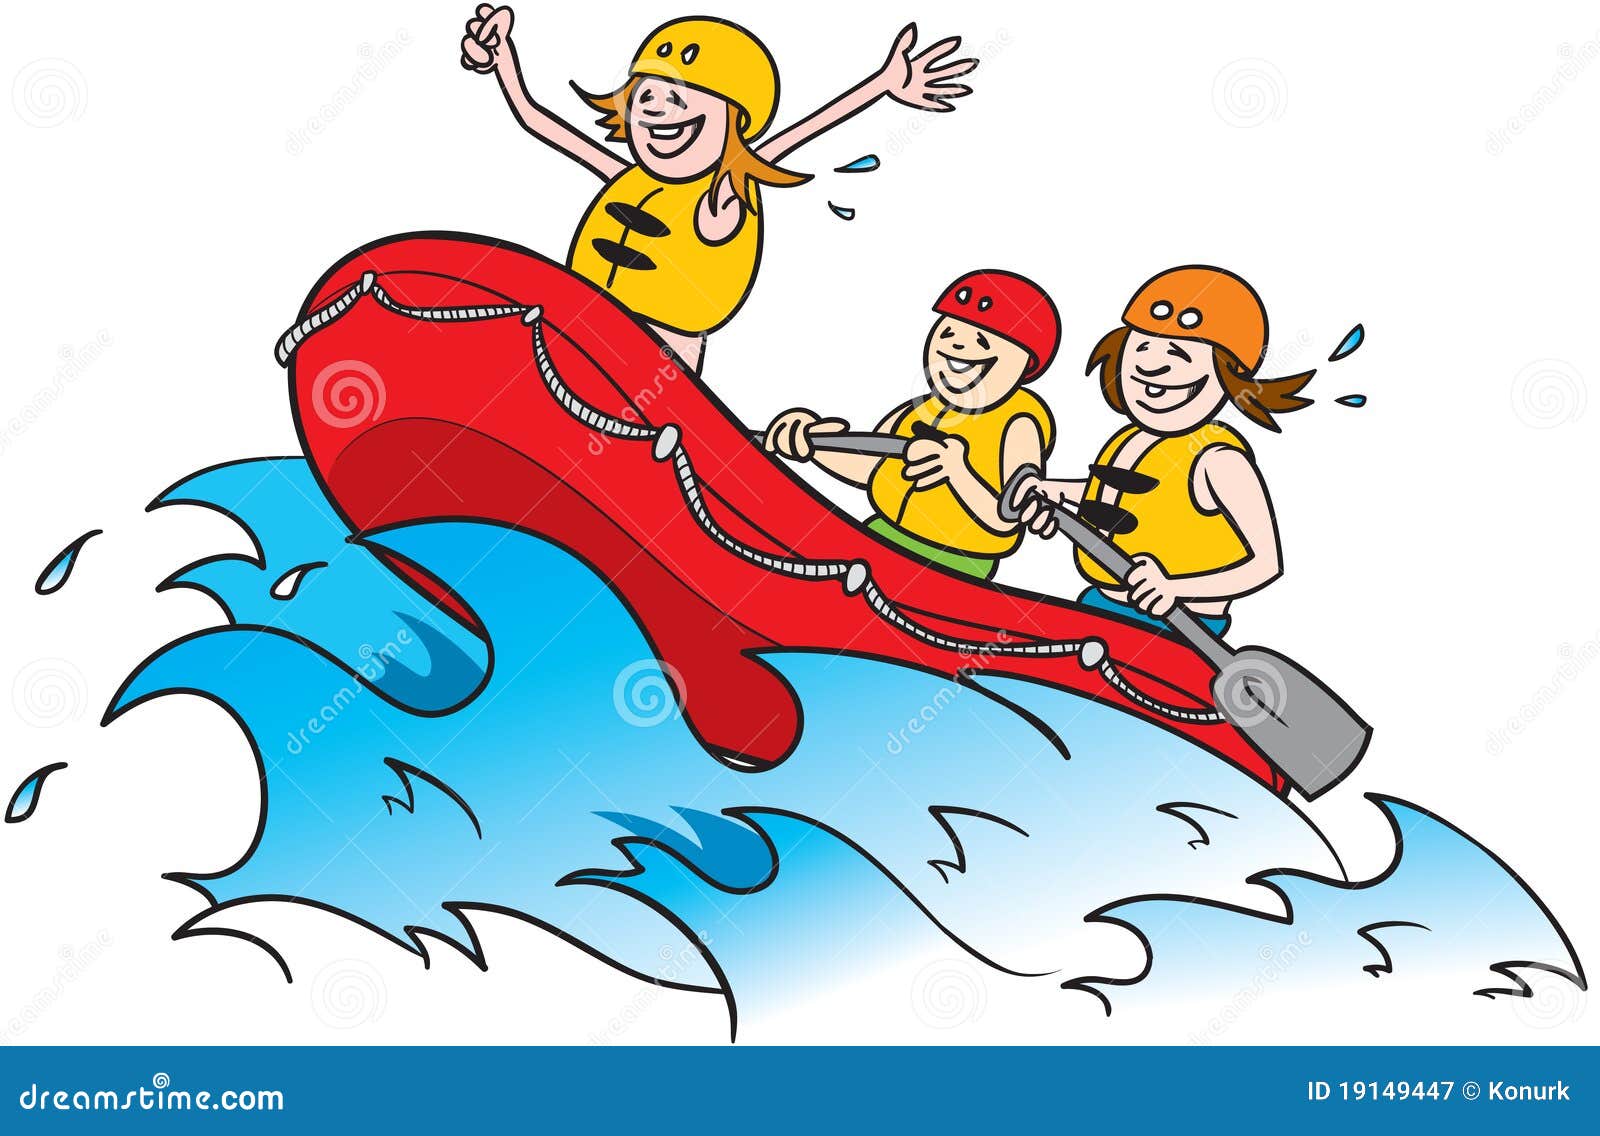 White Water Rafting Royalty Free Stock Photography - Image: 19149447